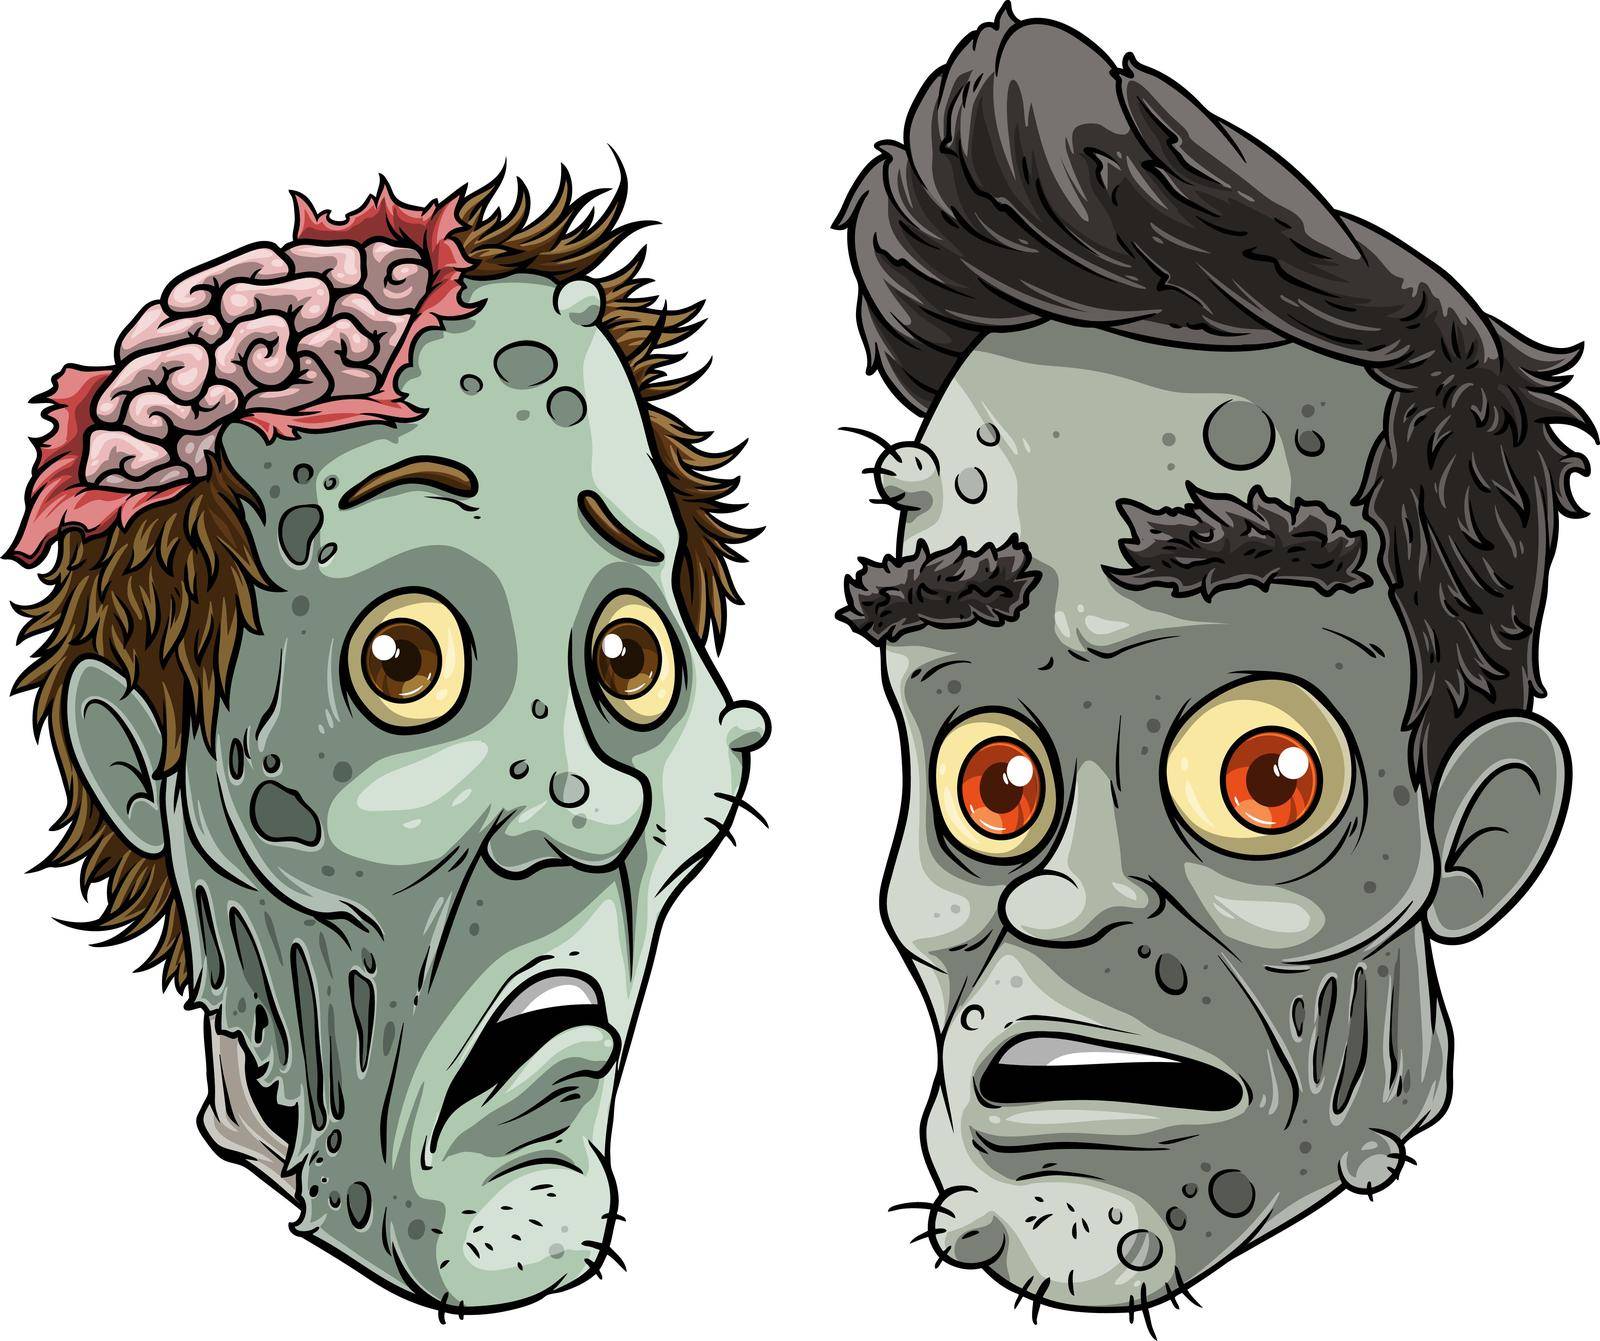 Cartoon colorful angry funny pale dead zombie monsters boy characters with brains. Isolated on white background. Halloween vector icon set.